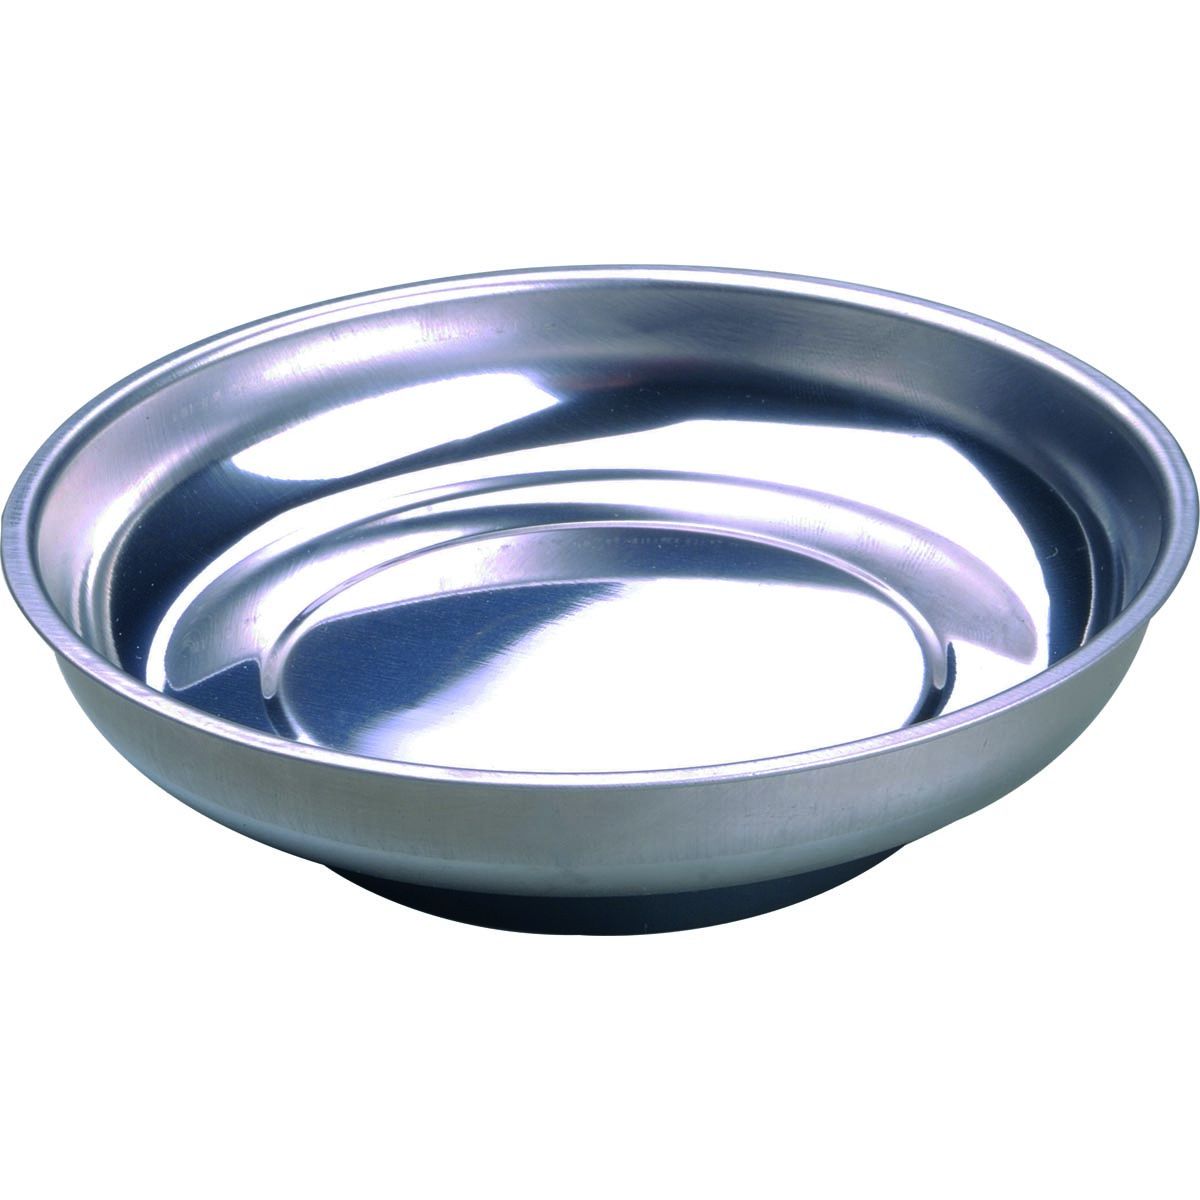 Stainless Steel Magnetic Dish With Soft Non Scratch Base 150mm Wide